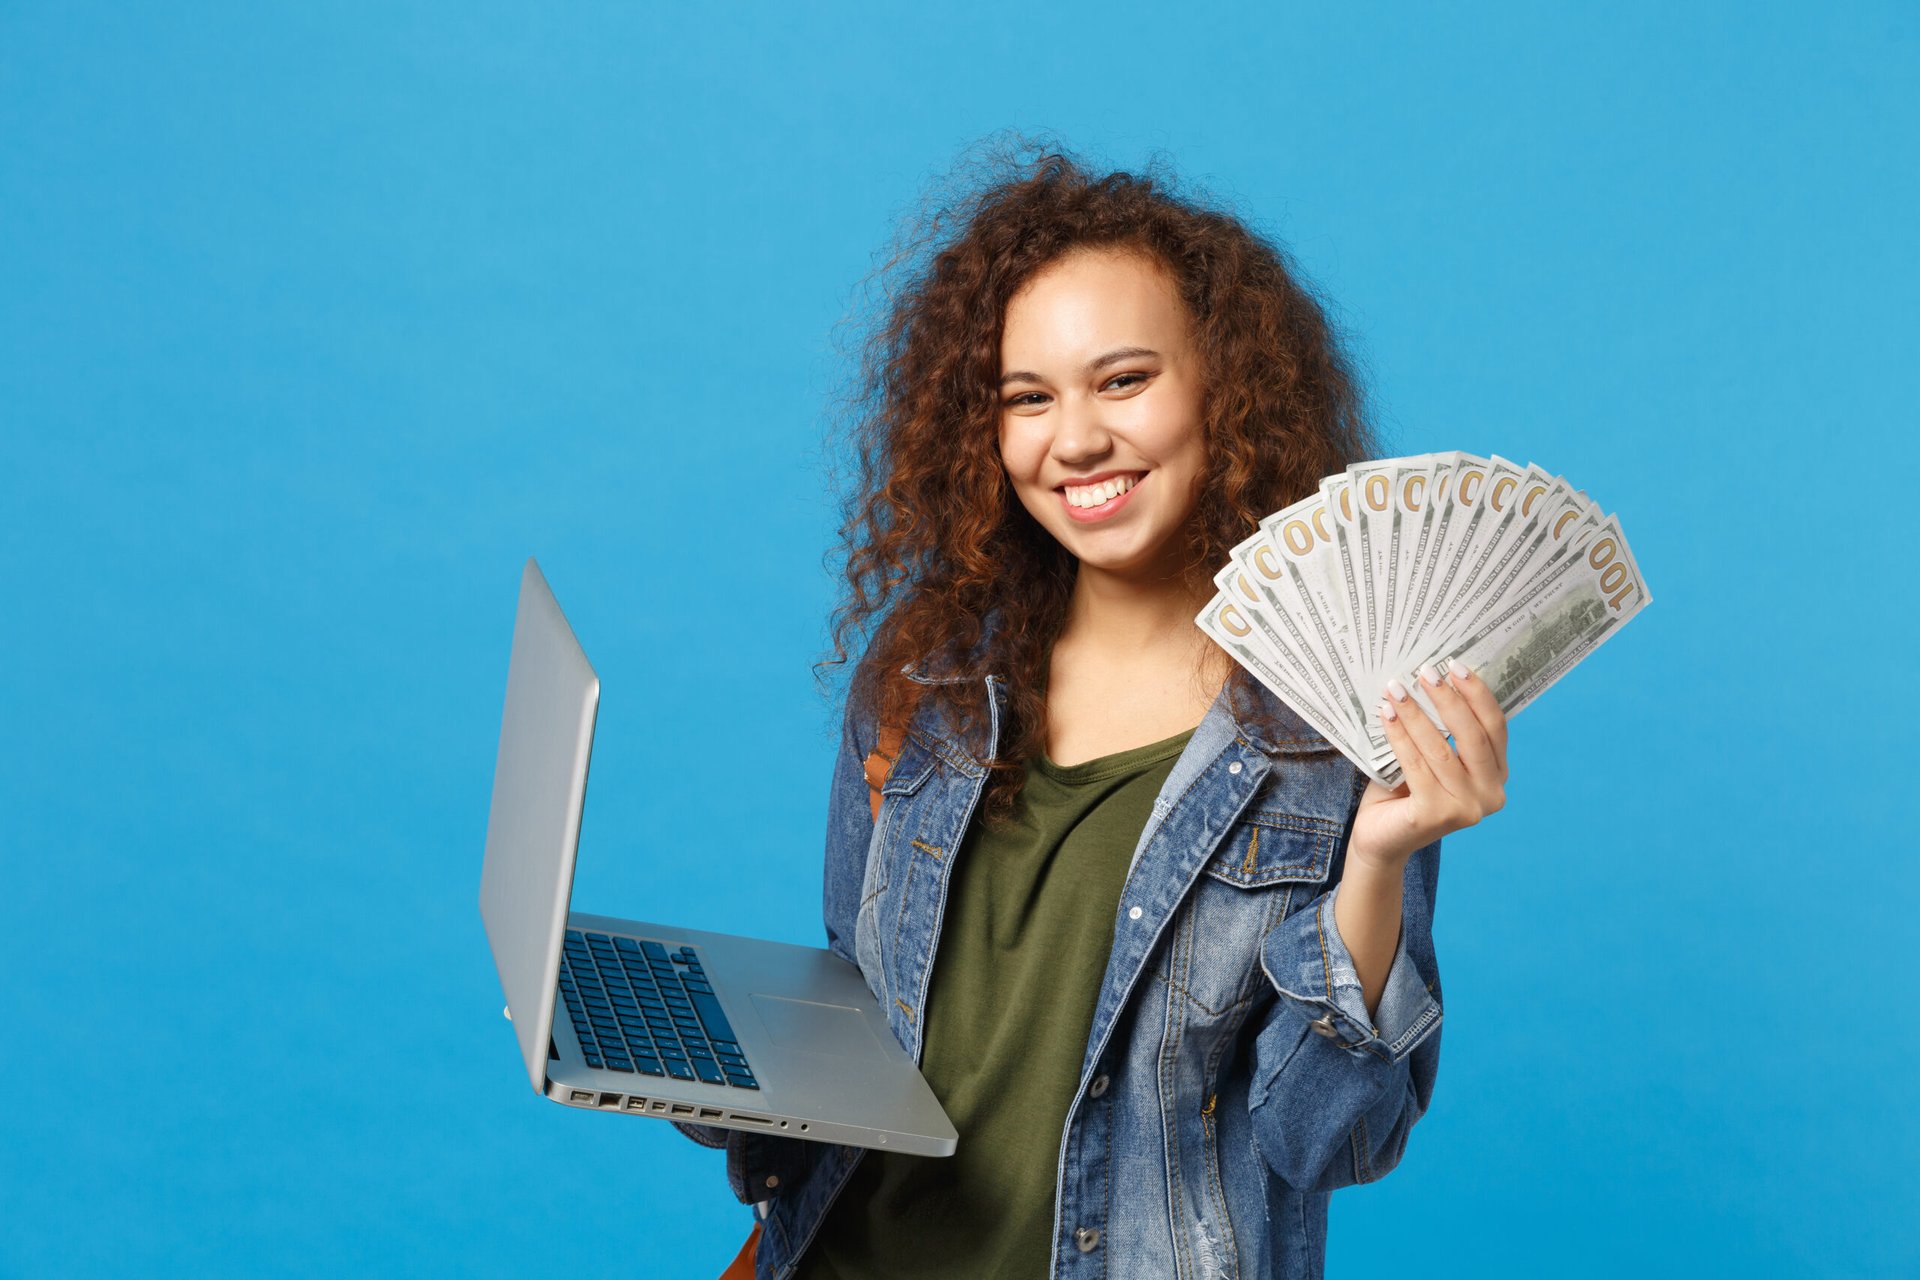 Teen girl with computer and money